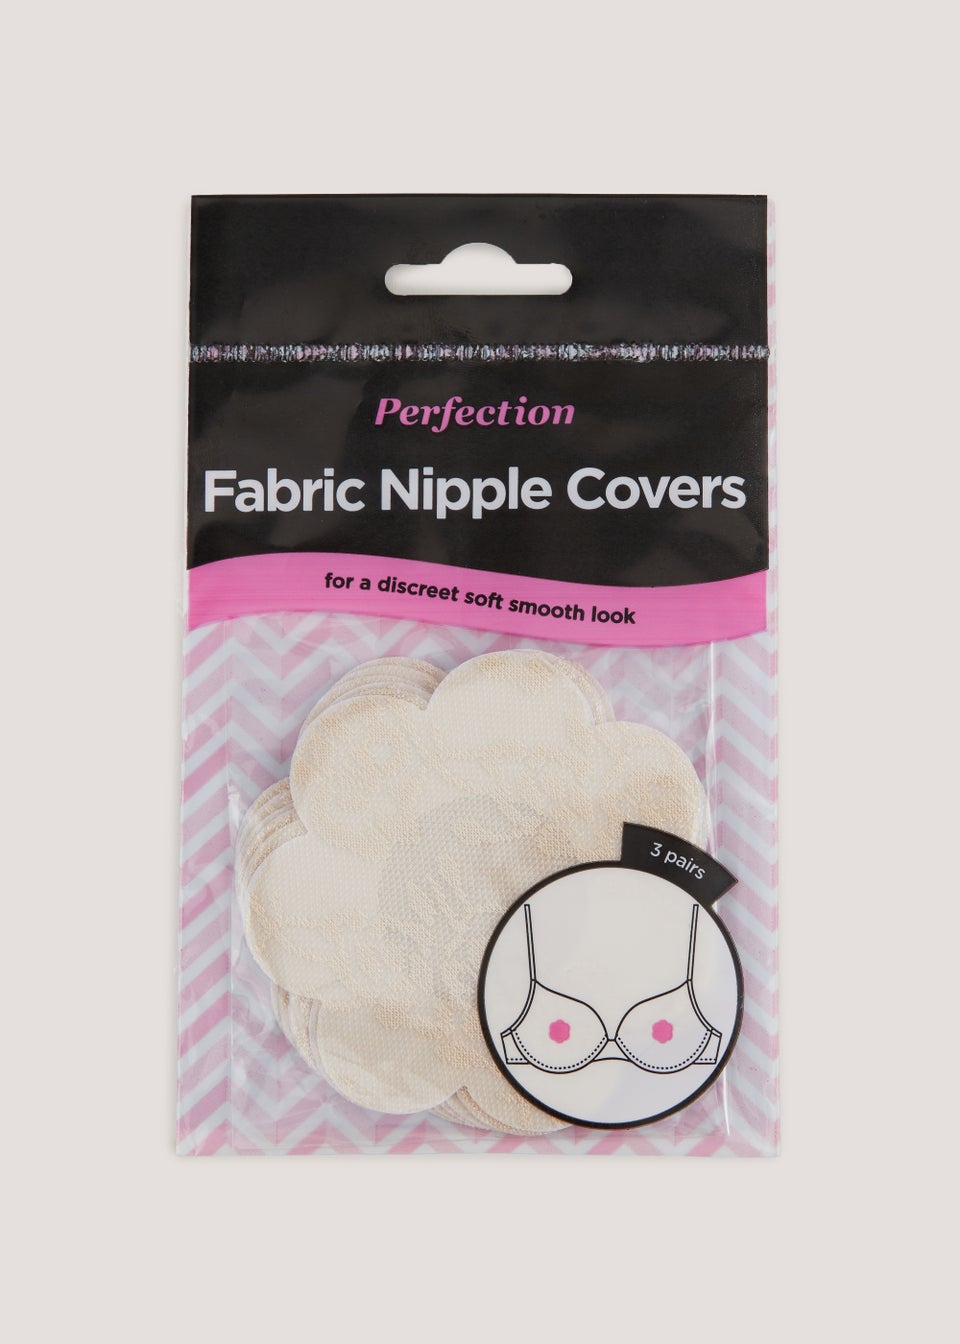 Perfection 3 Pack Fabric Nipple Covers